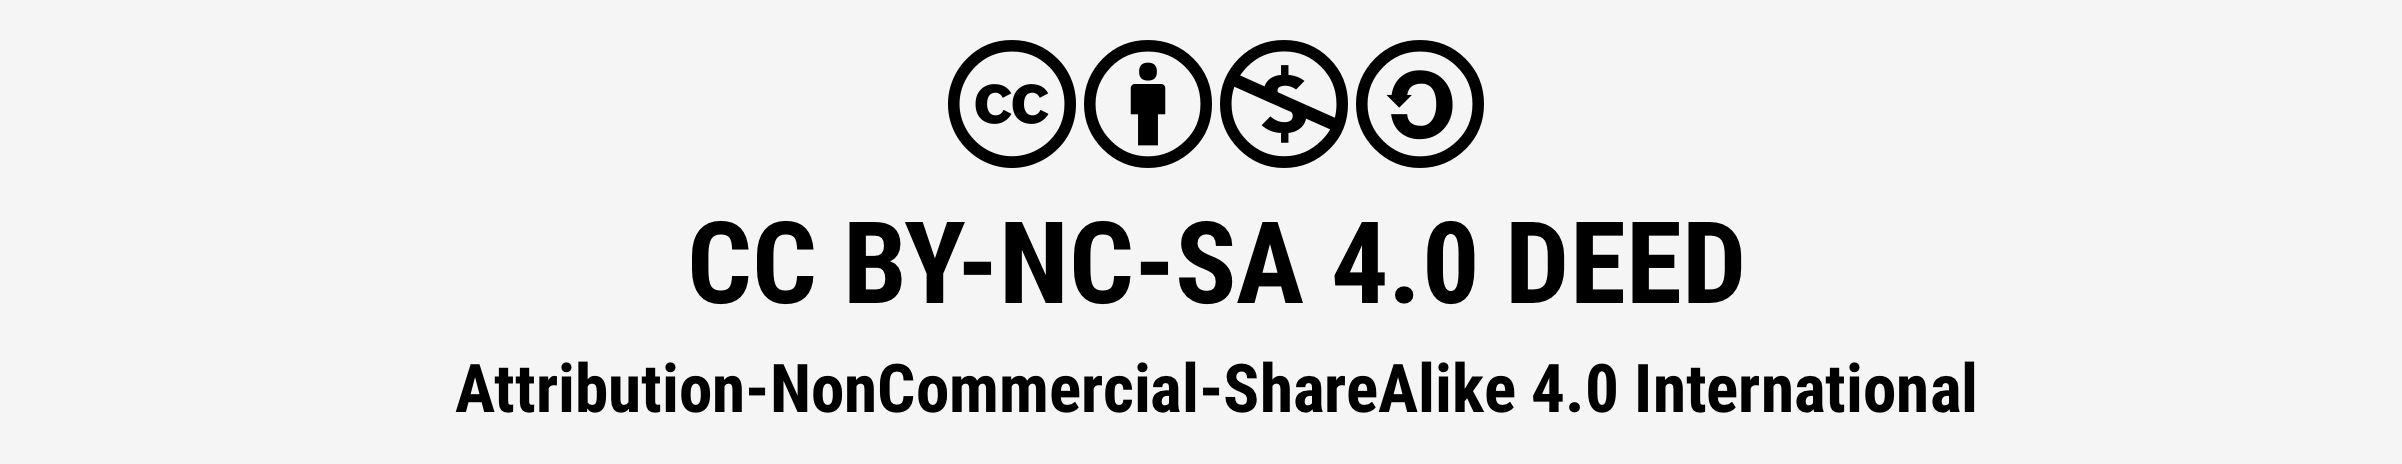 Image showing the icons and text for a Creative Commons Attribution-NonCommercial-ShareAlike 4.0 International License